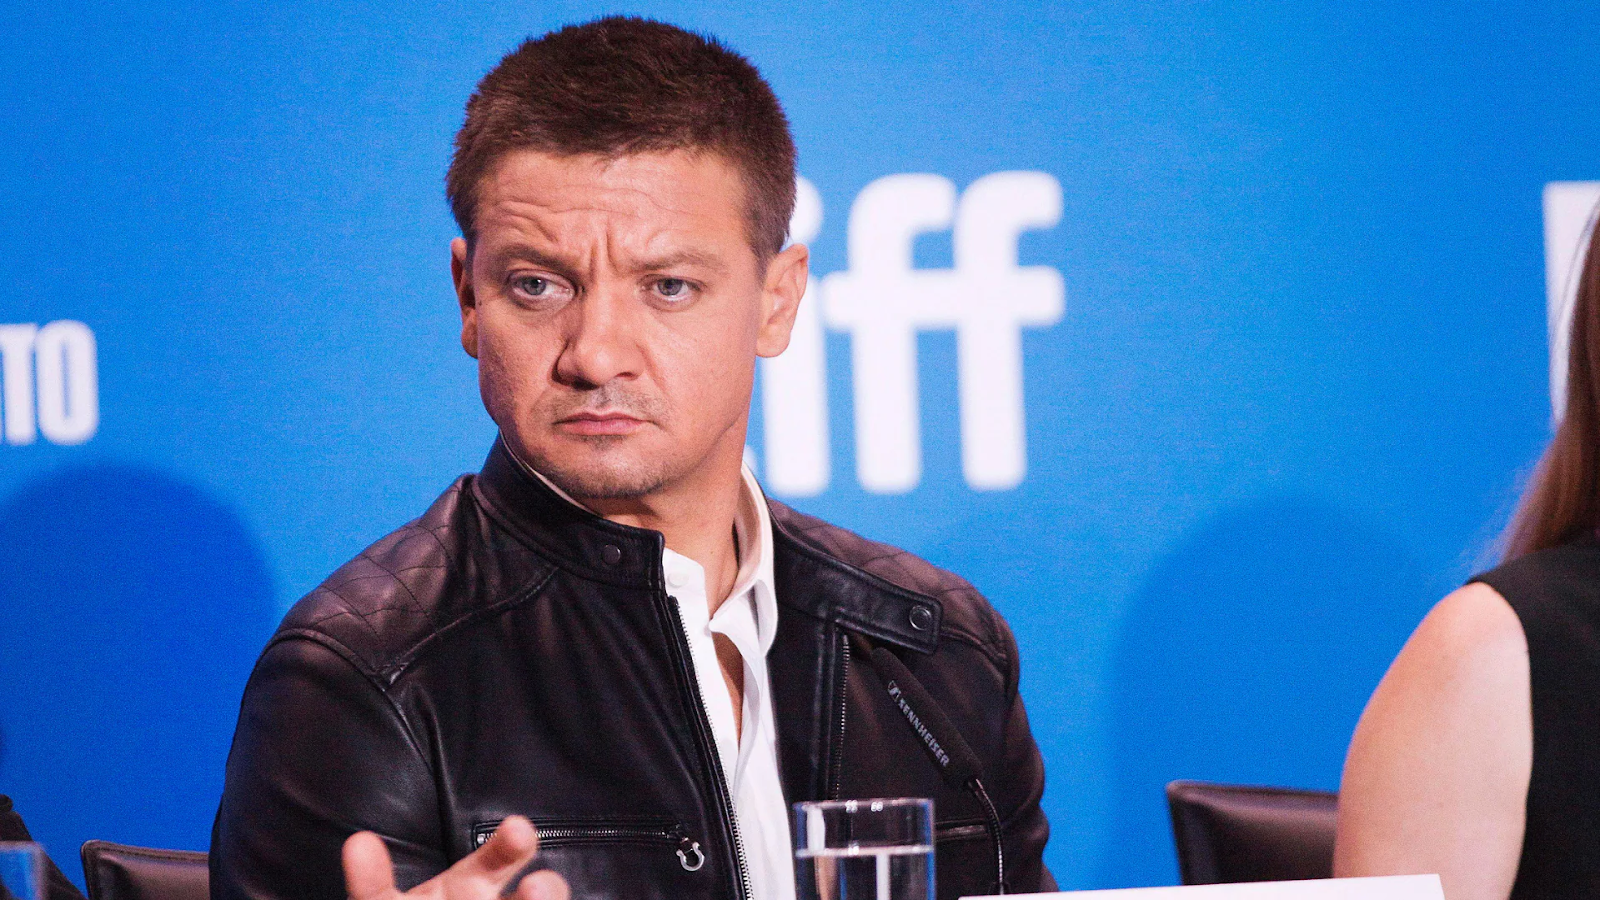 Jeremy Renner Rumors and Controversies